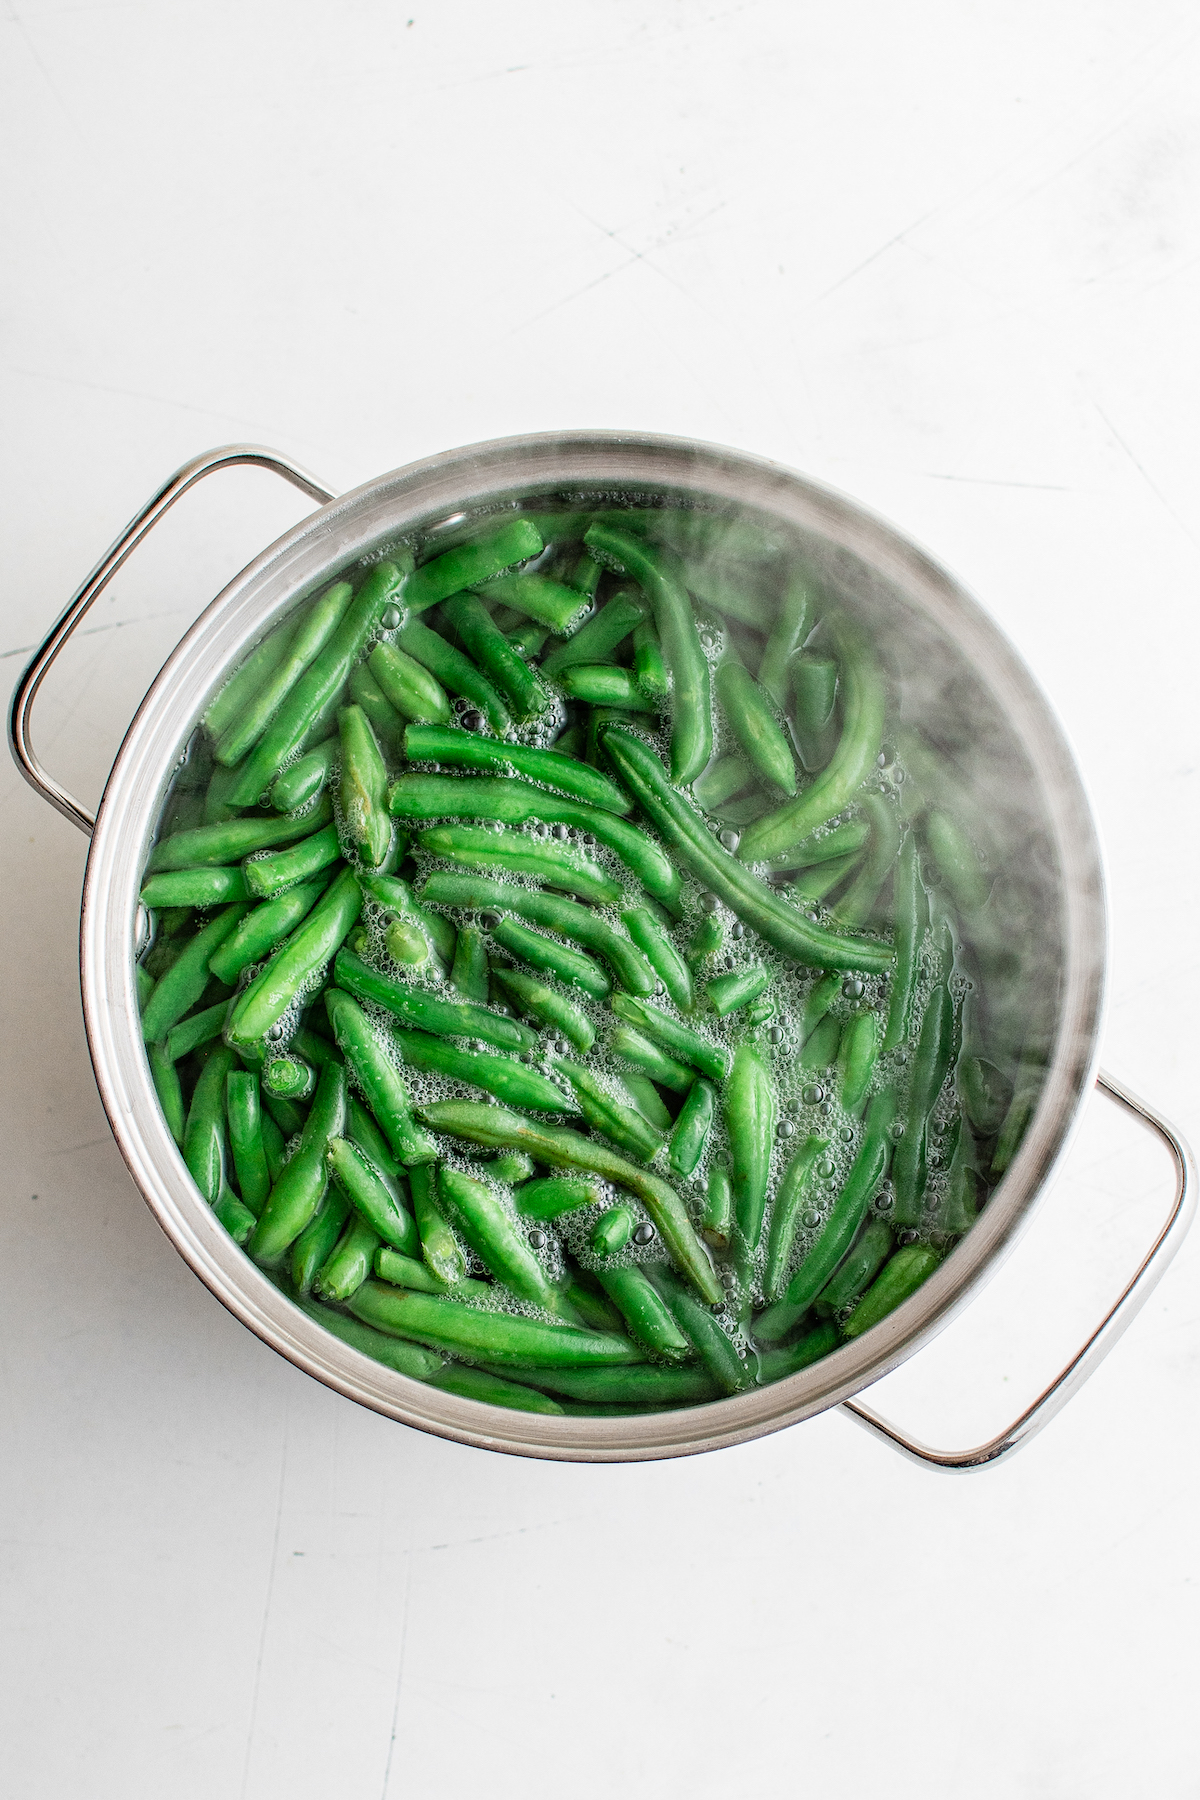 Green beans in boiling water.